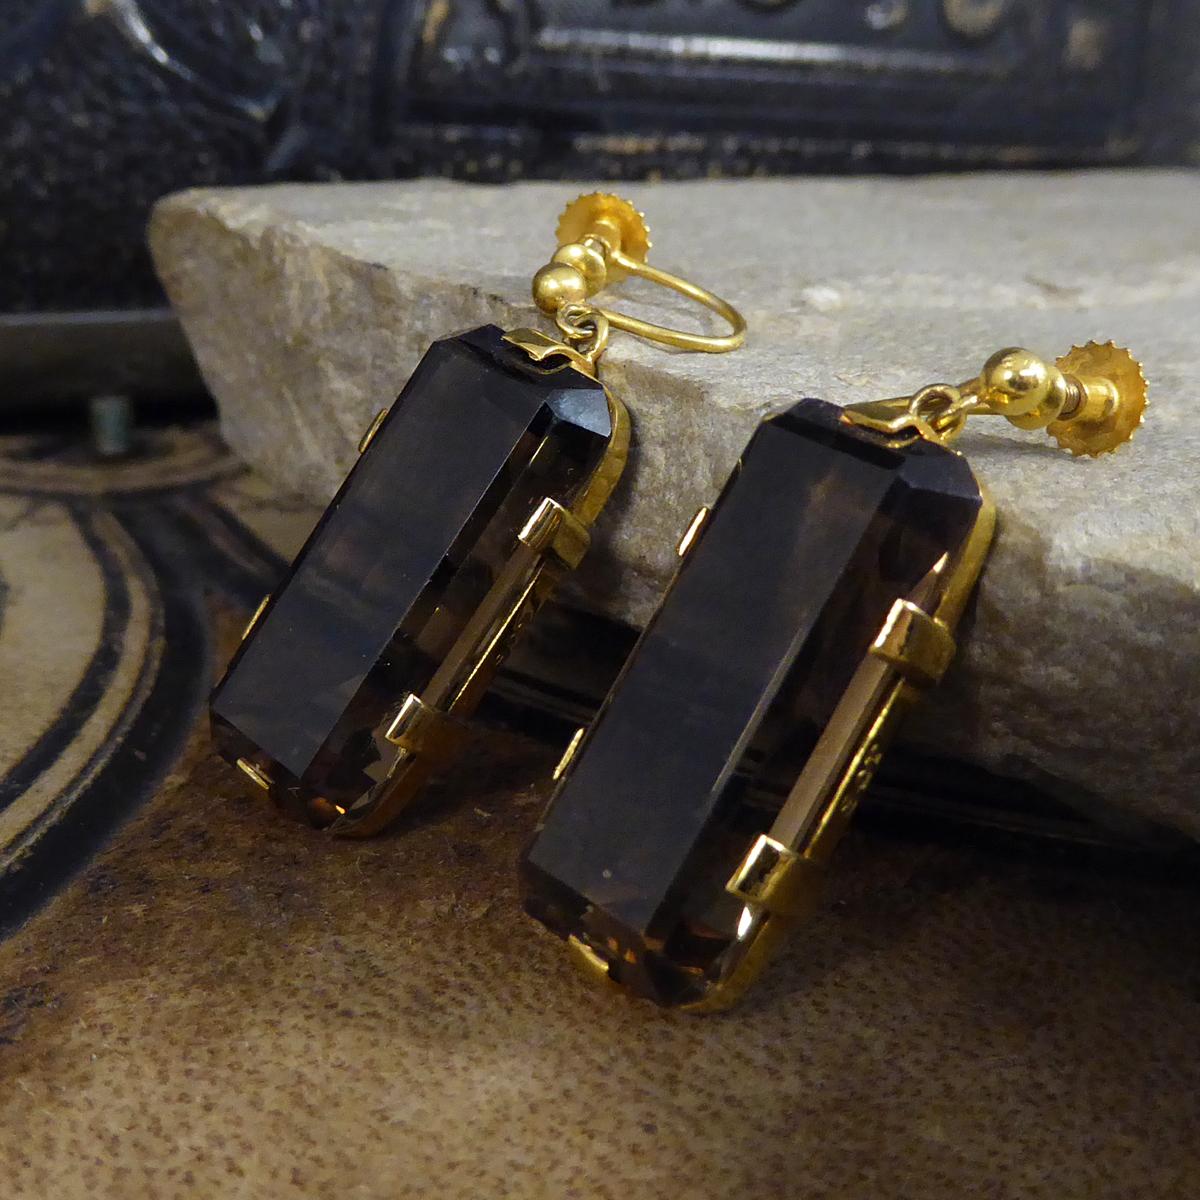 These lovely vintage earrings have been crafted from 9ct Yellow Gold with clear stamps on the settings. The earrings feature a single Smokey Quartz stone in a six flat claw setting. The earrings are screw back and do not have need for the ears to be